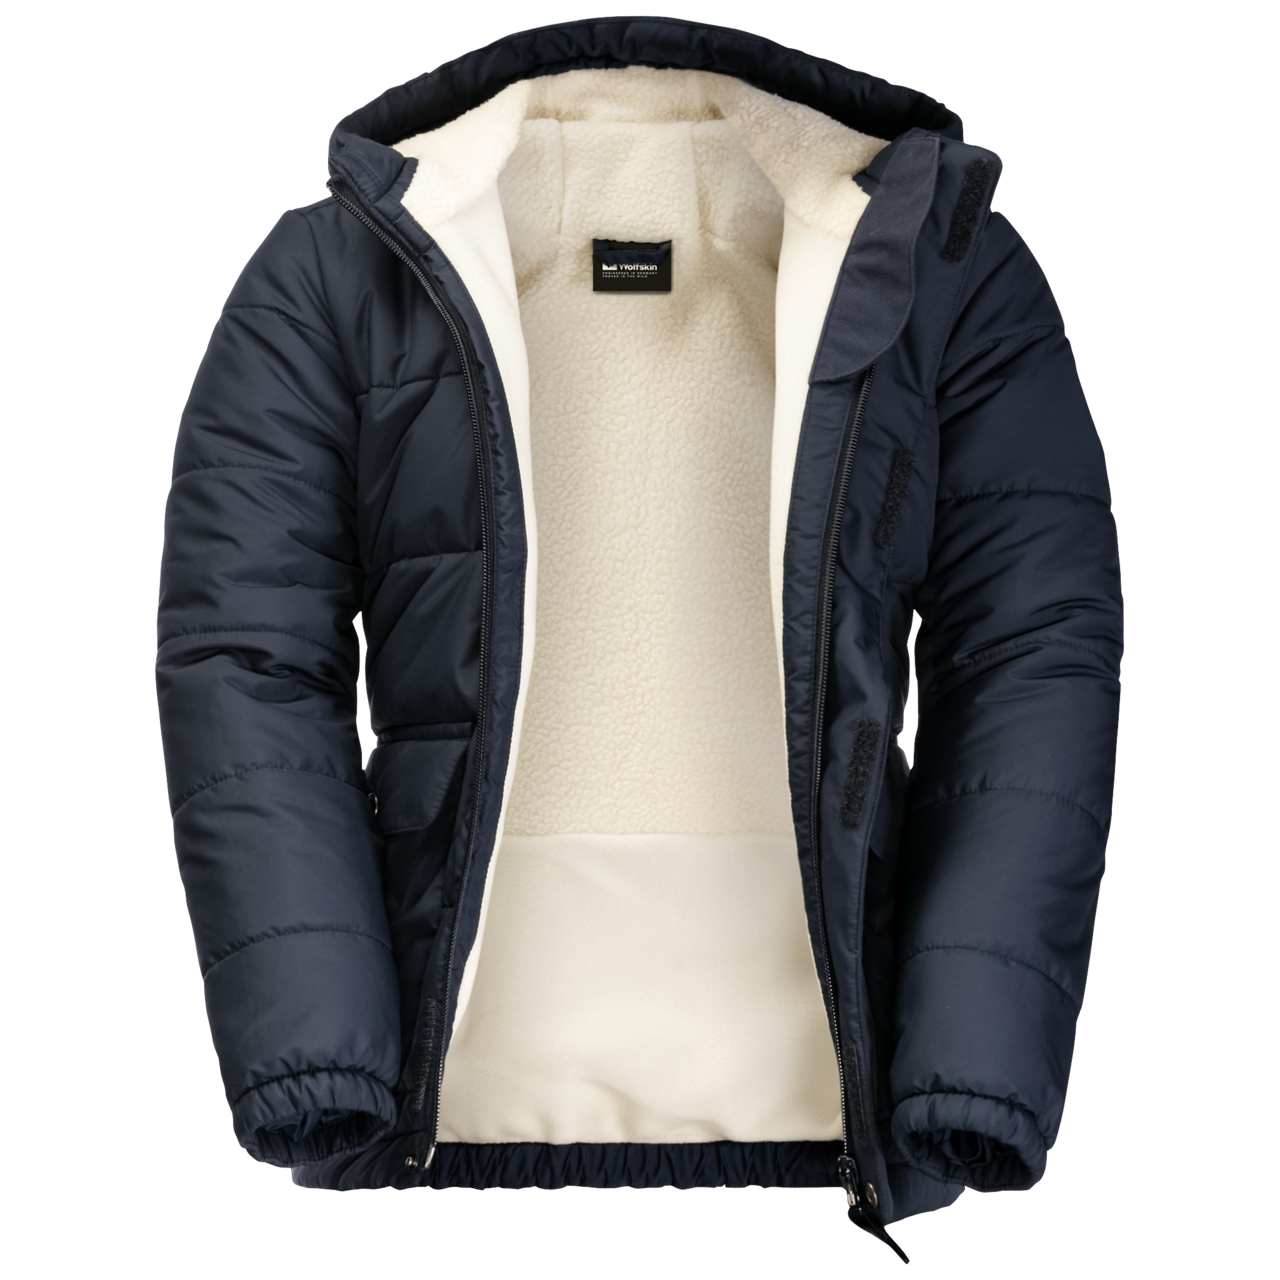 HOLLISTER ALL-WEATHER COLLECTION WINTER JACKET - SIZE M - Able